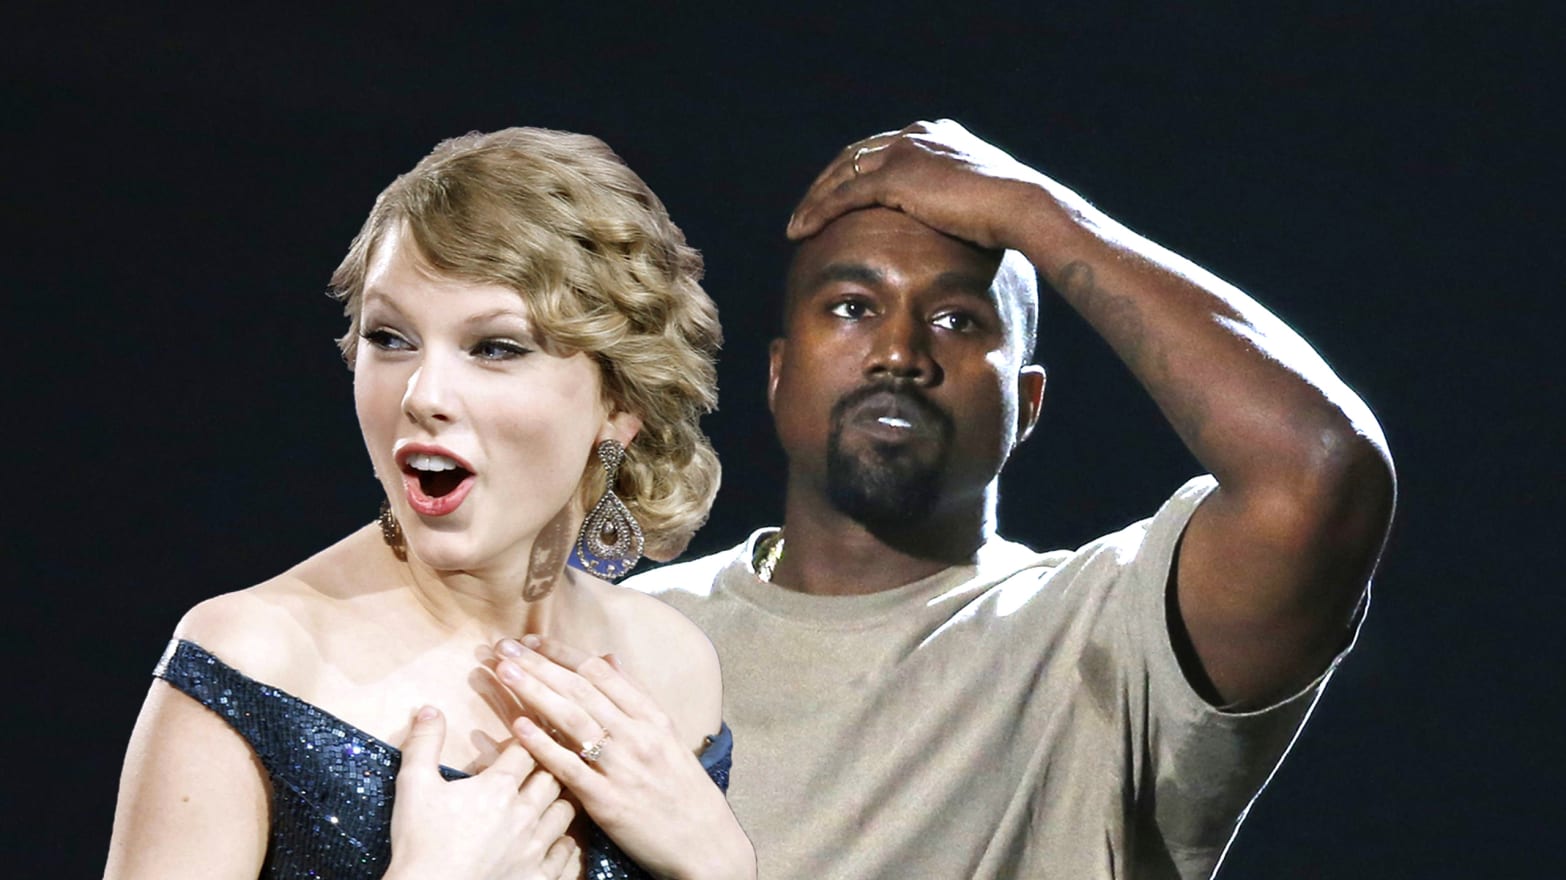 Taylor Swift And Kanye West’s Phone Call Leaked